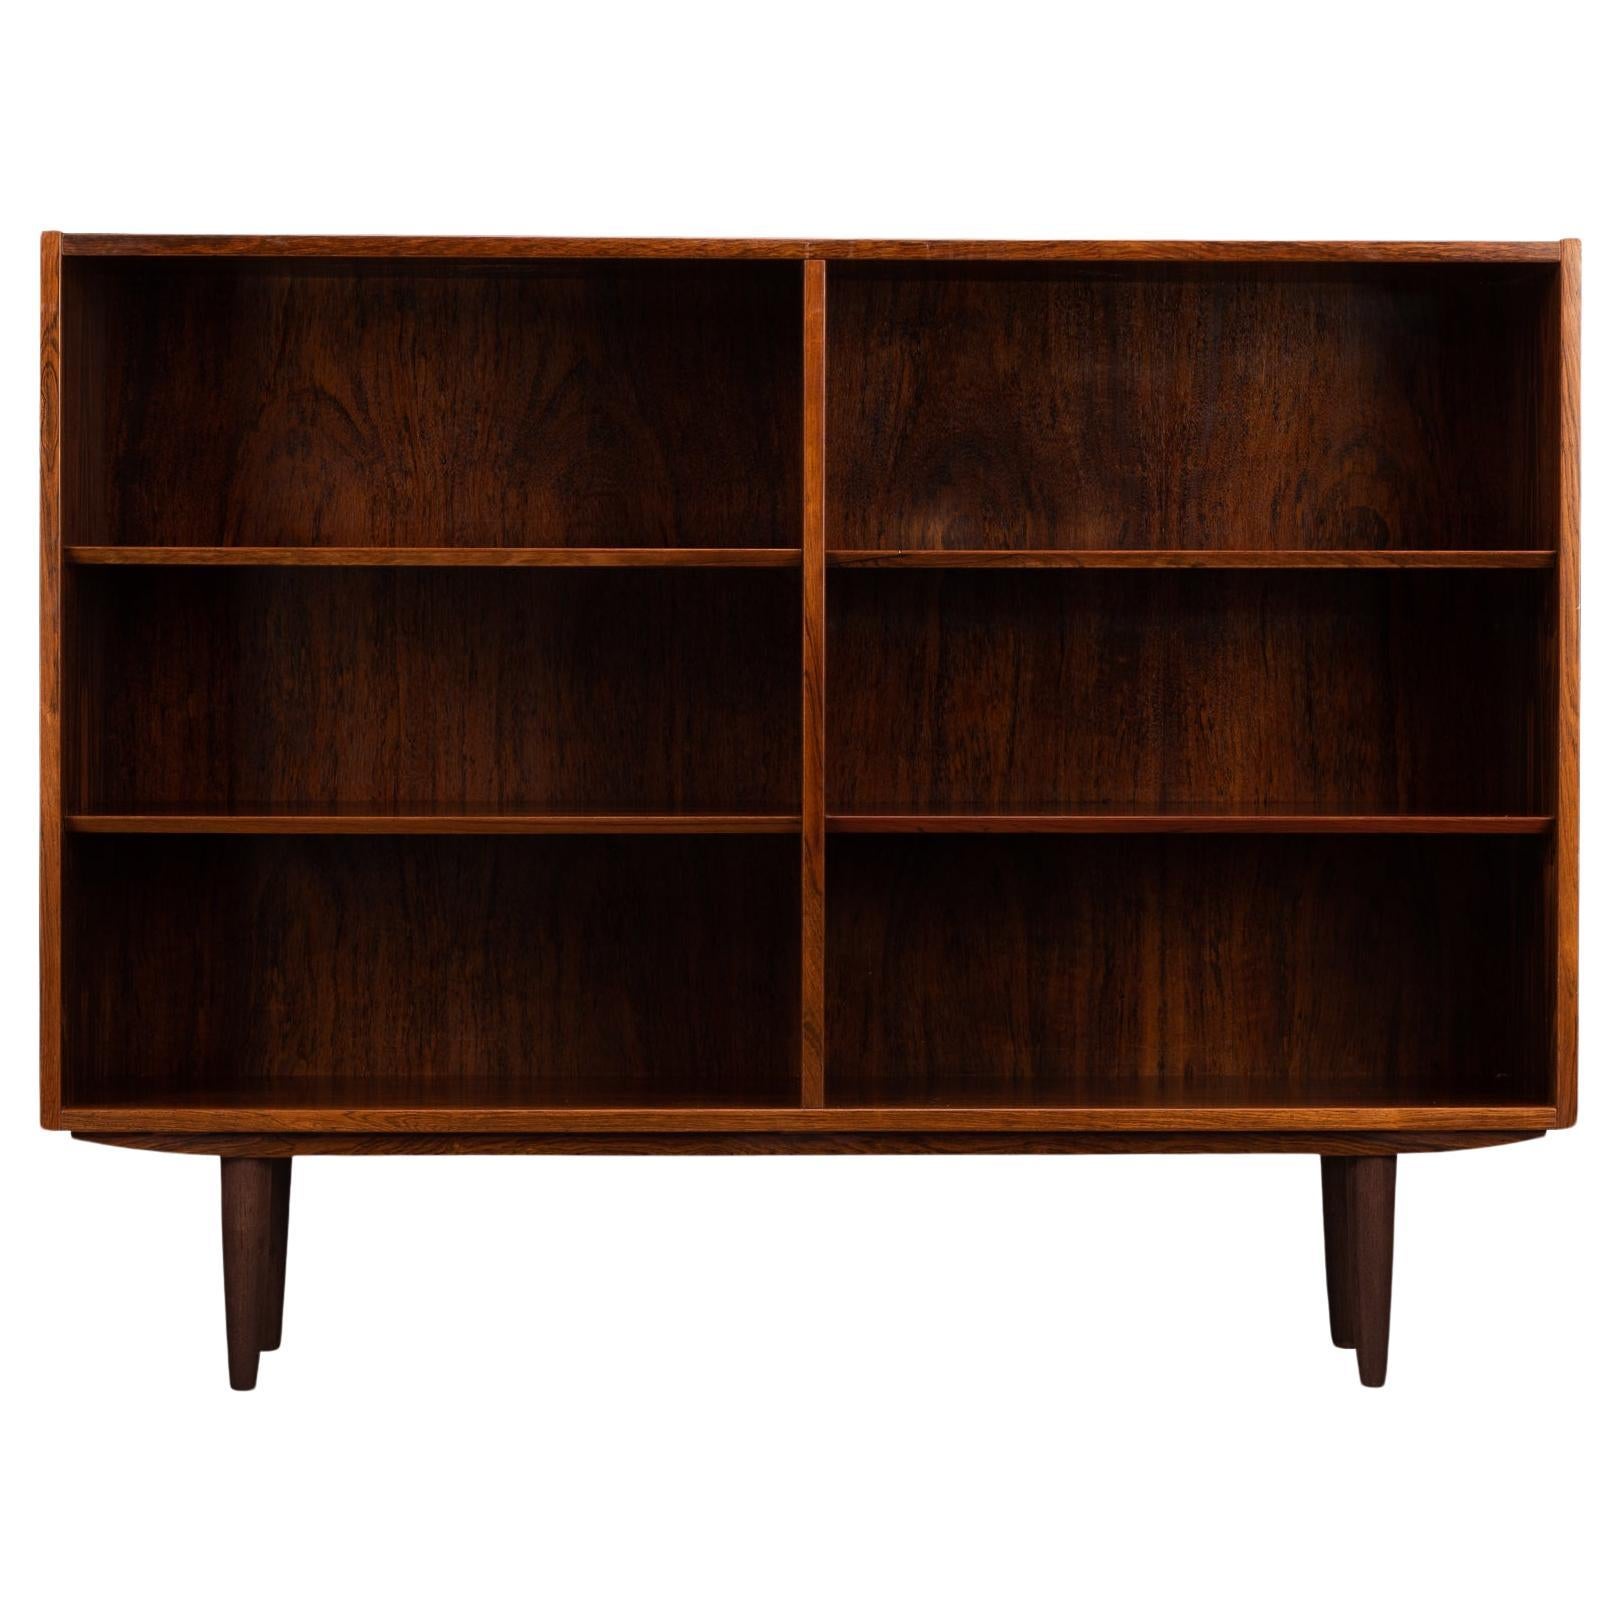 Low Rosewood Bookcase by Carlo Jensen for Hundevad & Co, 1960s